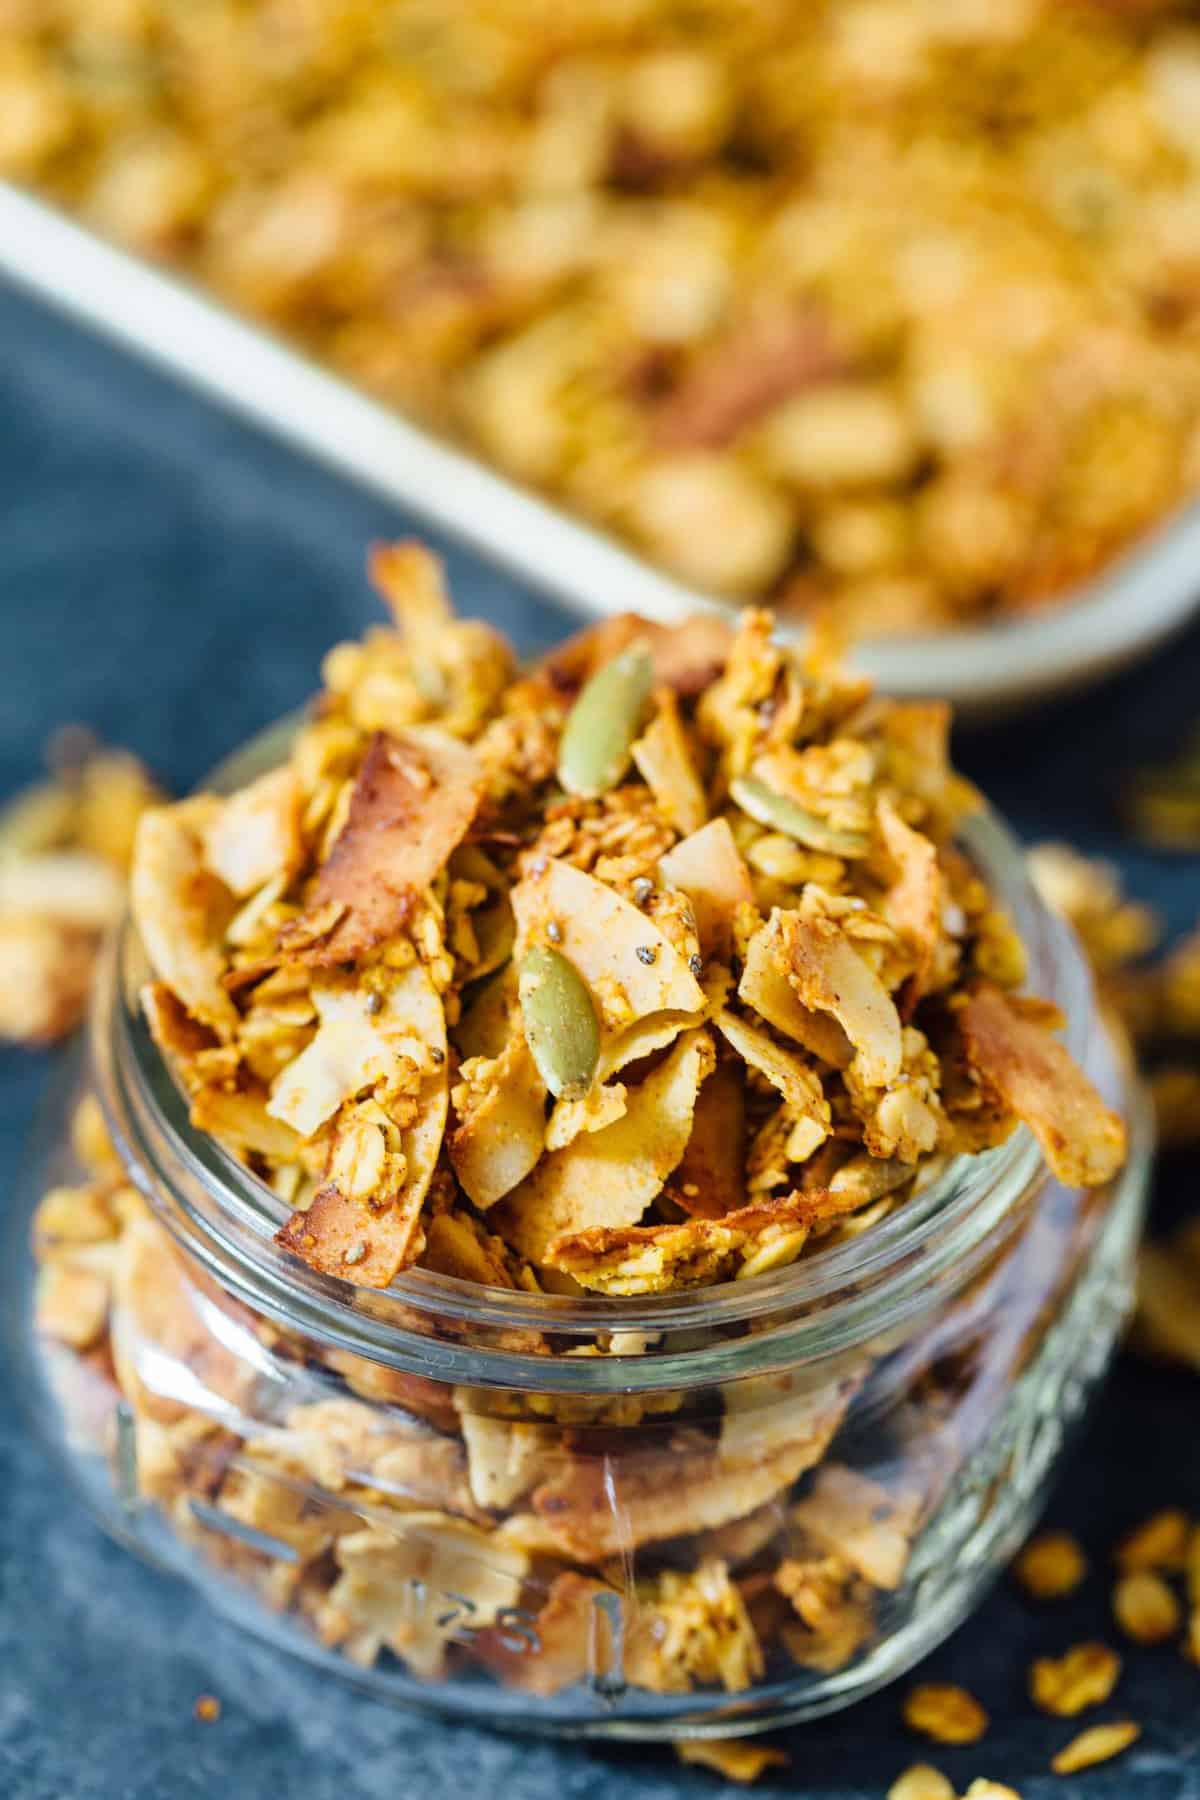 This pumpkin coconut granola has all the flavors of Fall in this sweet and salty combination! It's perfect to top on plain yogurt, oats, or even with milk!